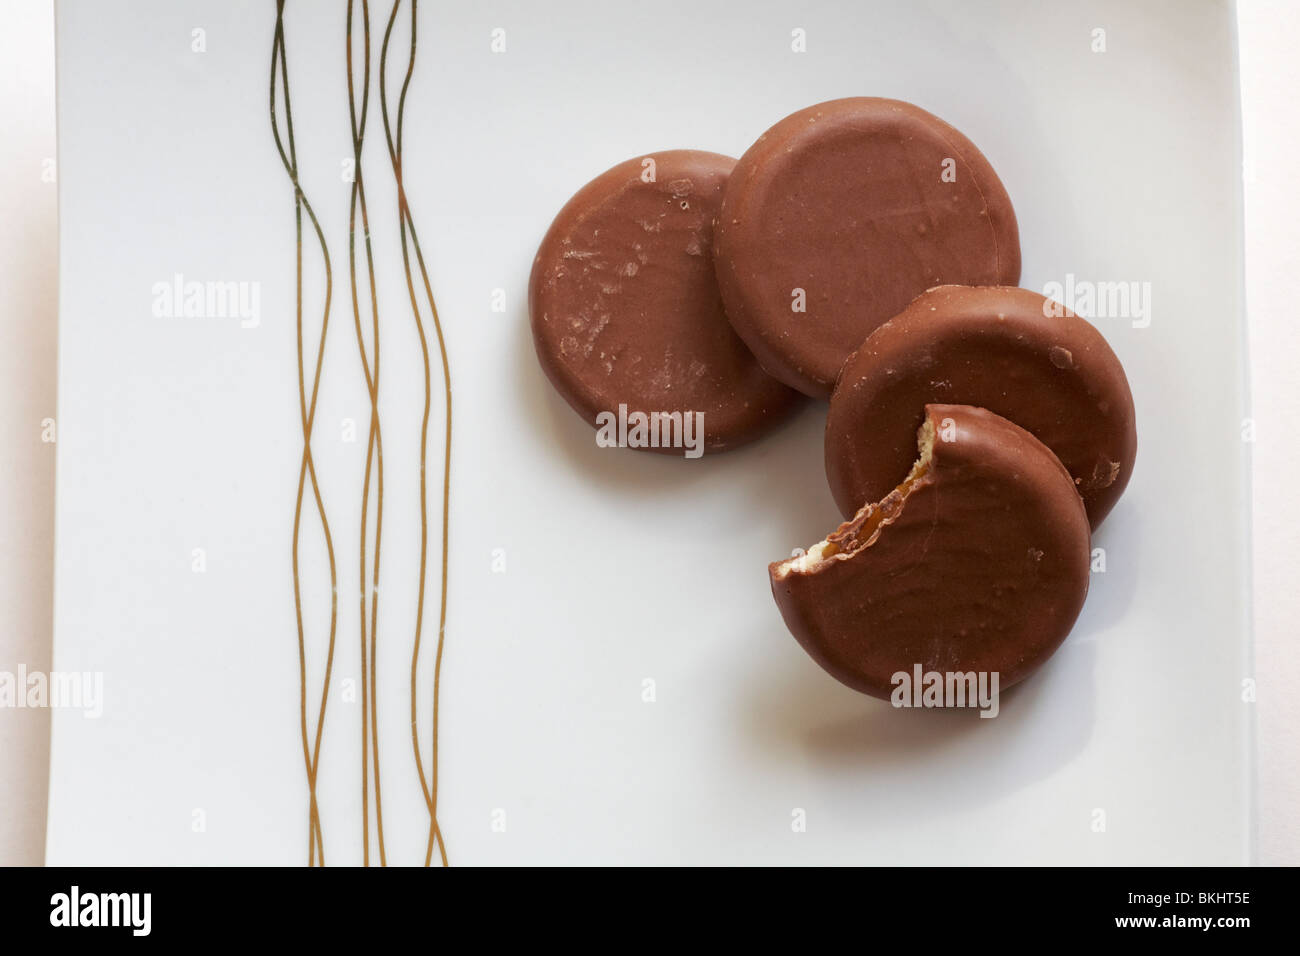 Four Cadbury Caramel biscuits, one bitten into, on plate Stock Photo